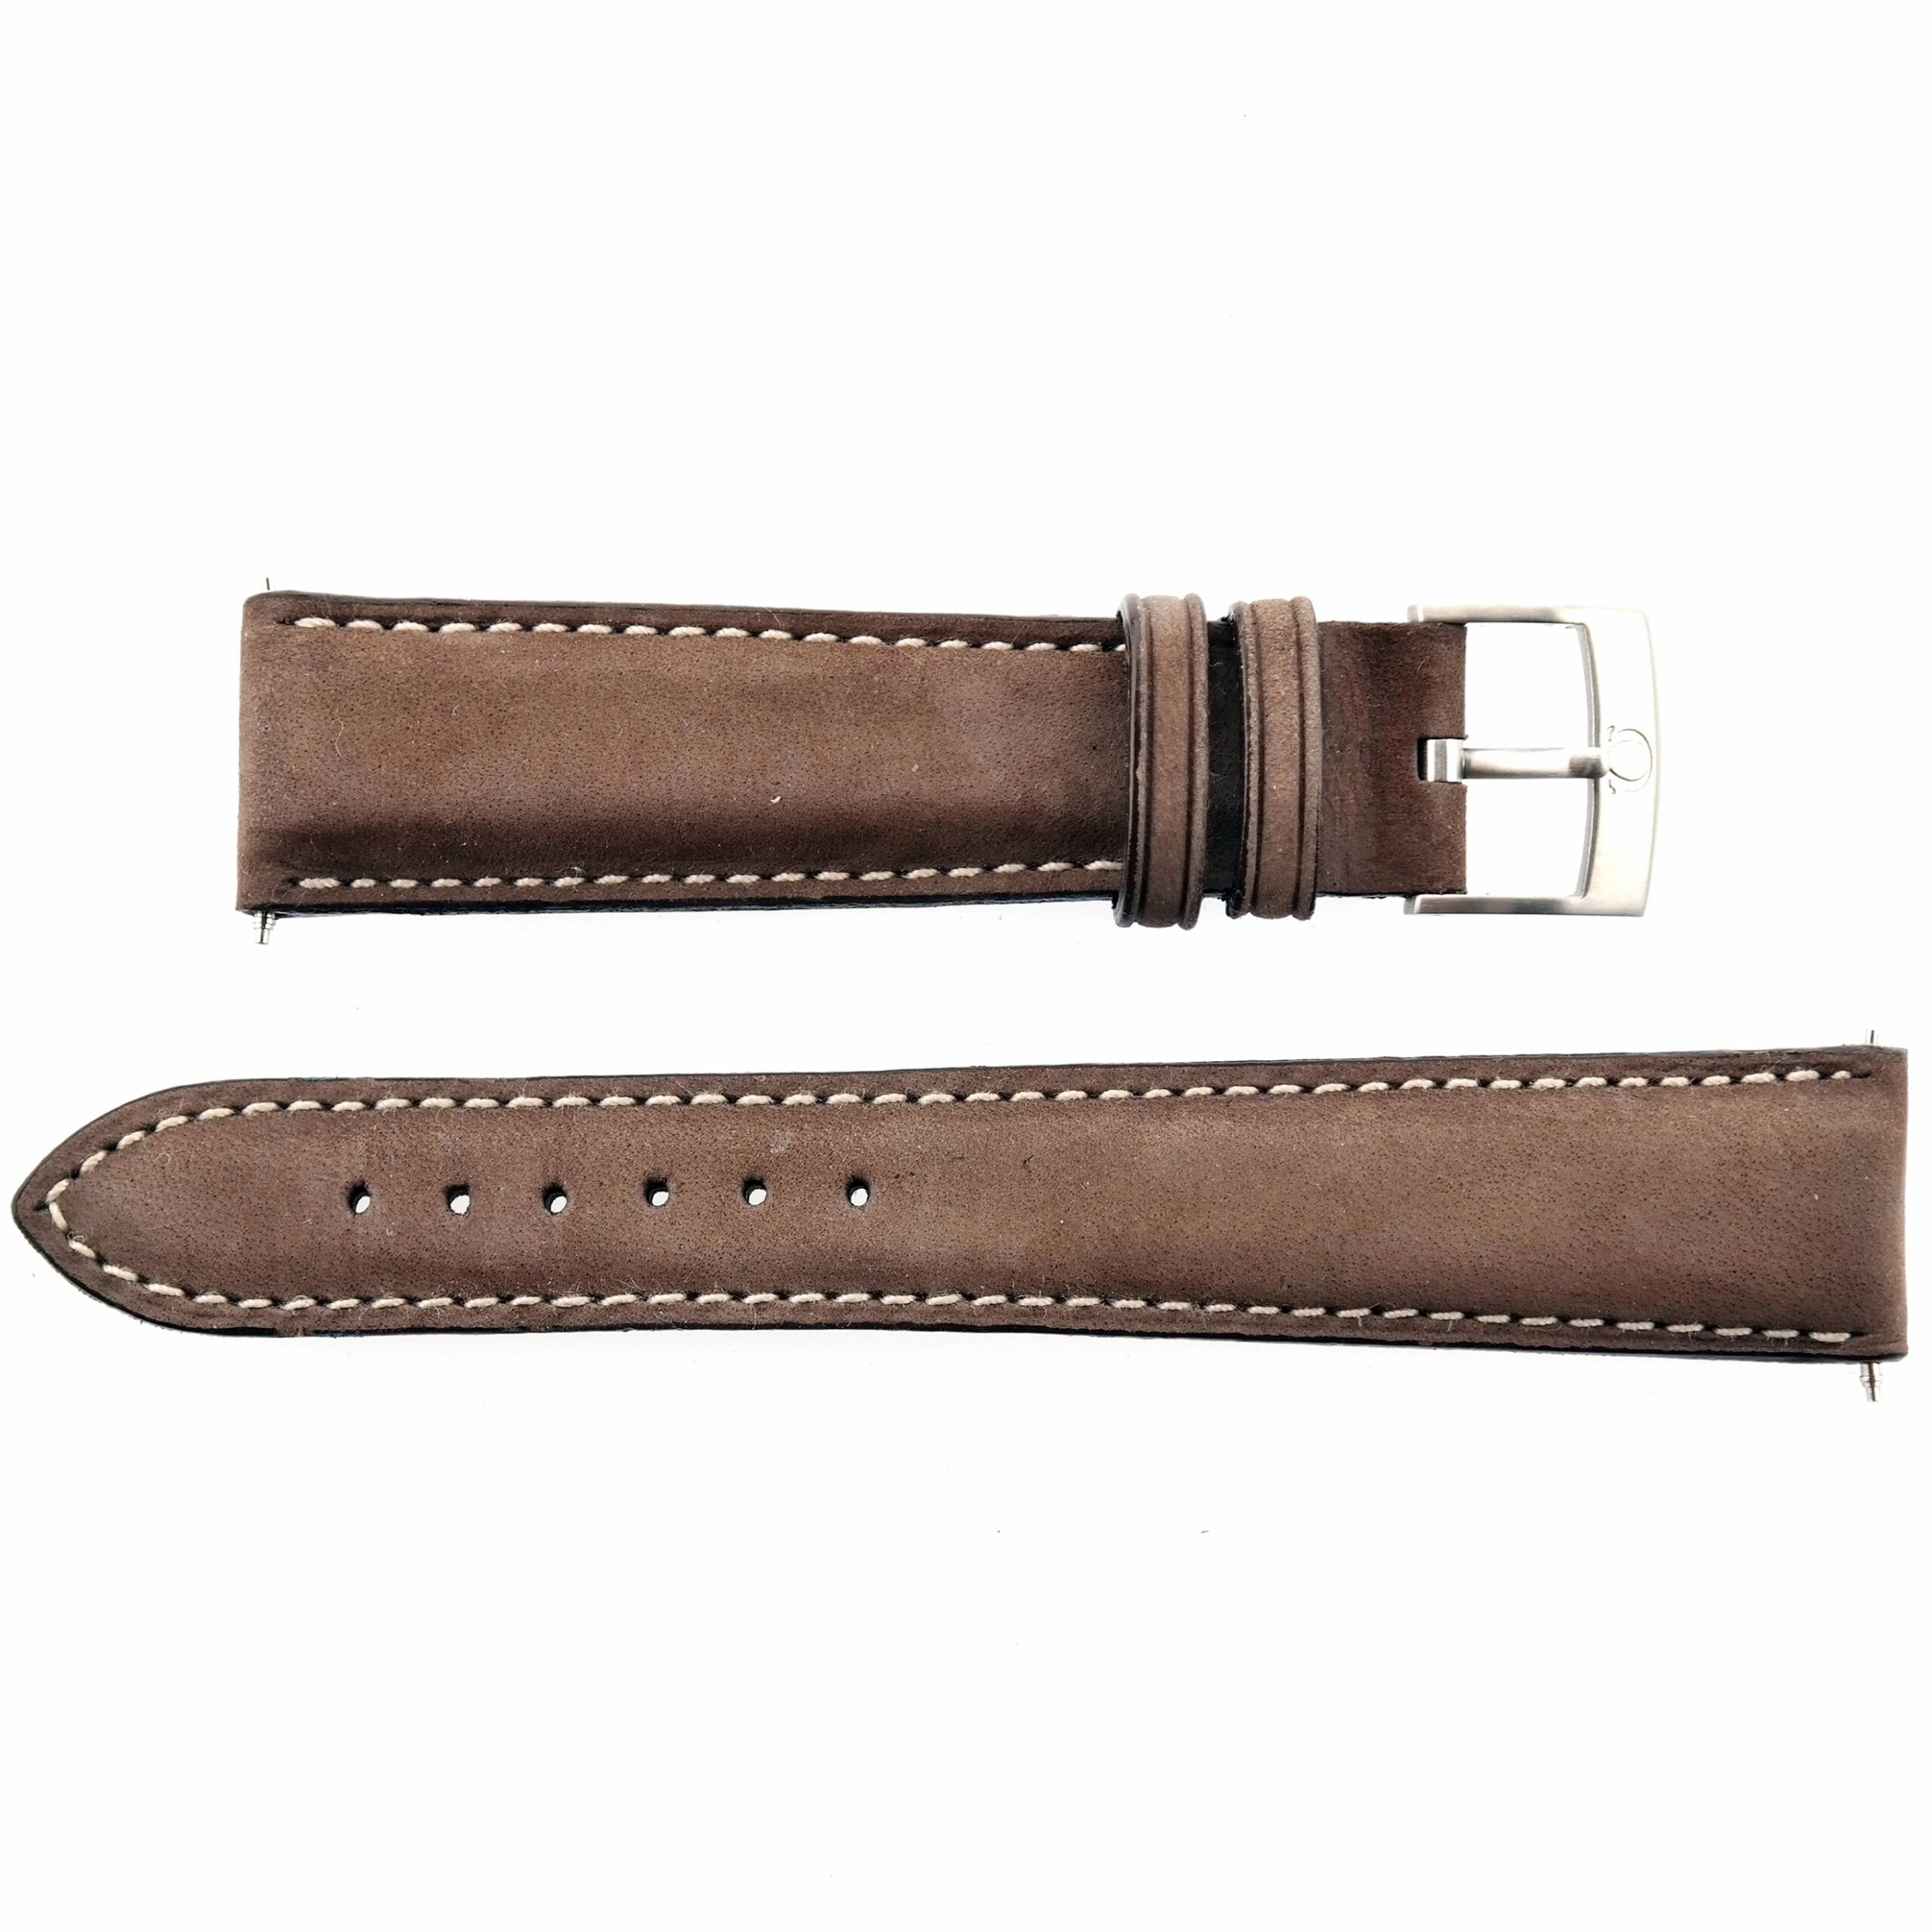 Authentic OMEGA - 0483038 - 19 mm Nubuck Leather Watch Strap